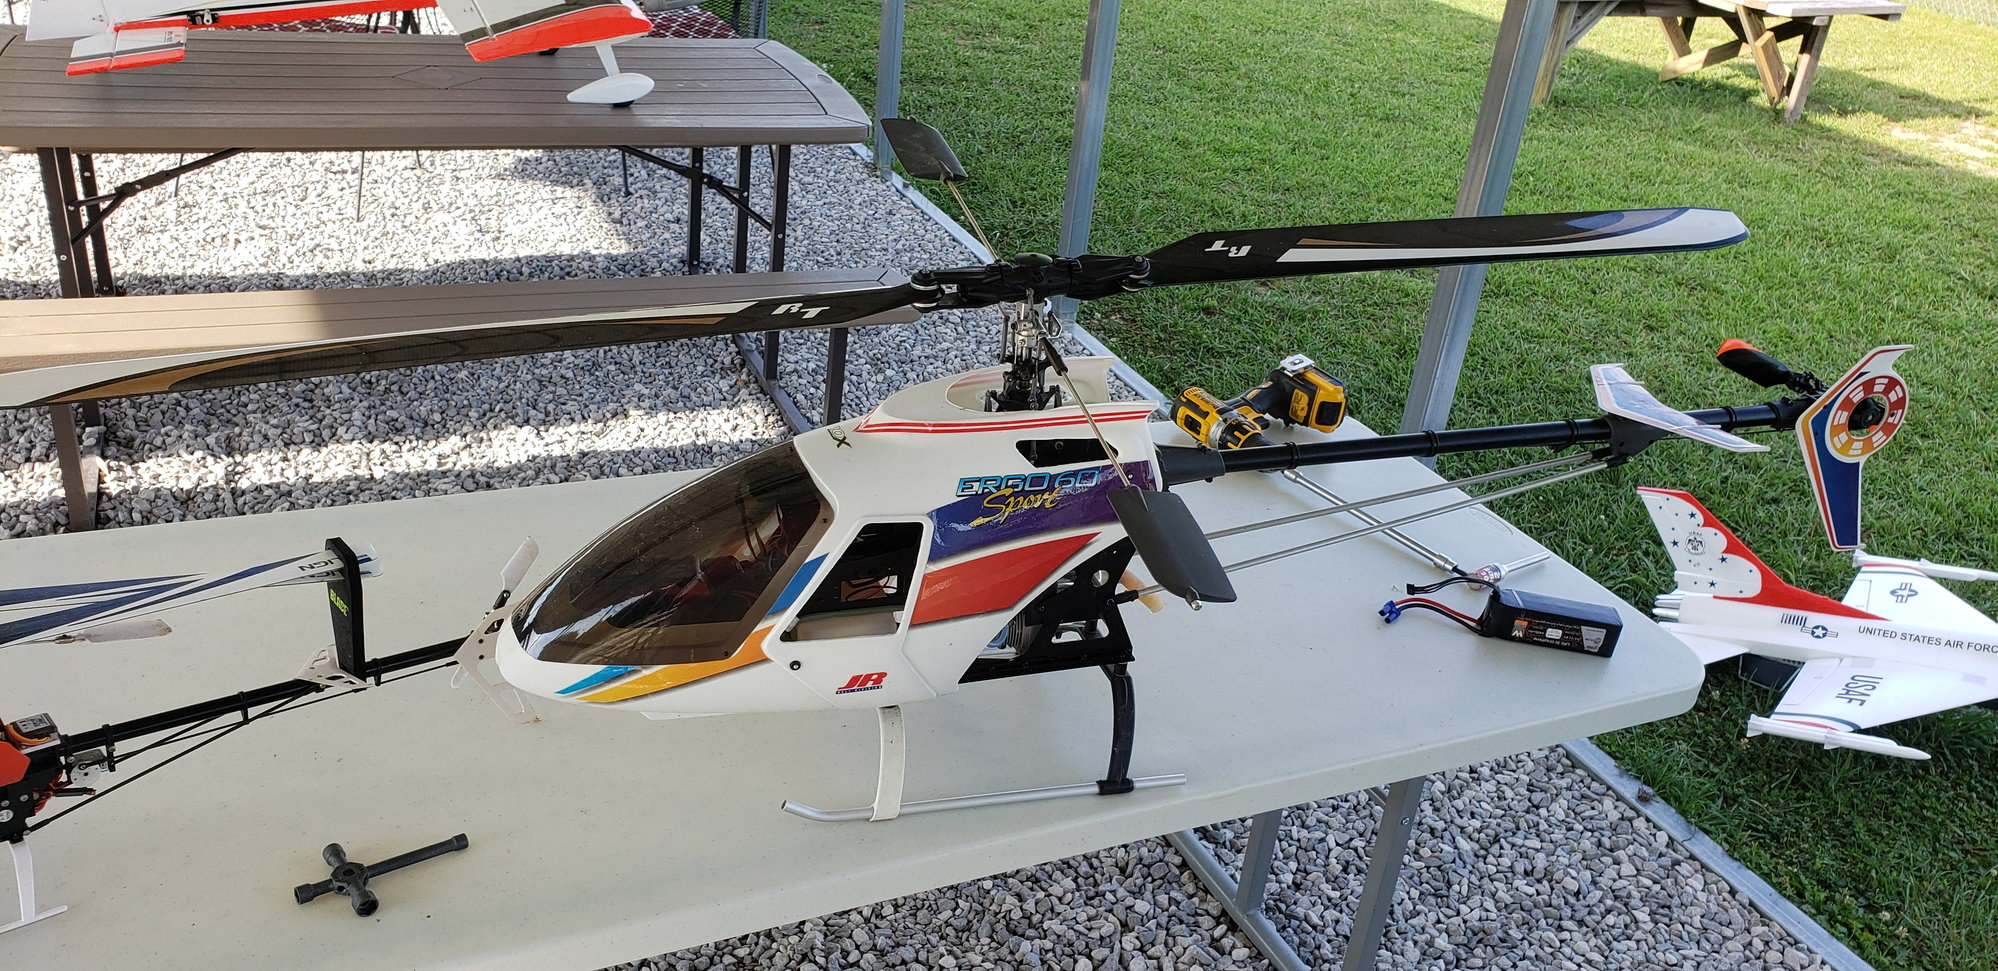 jr rc helicopters